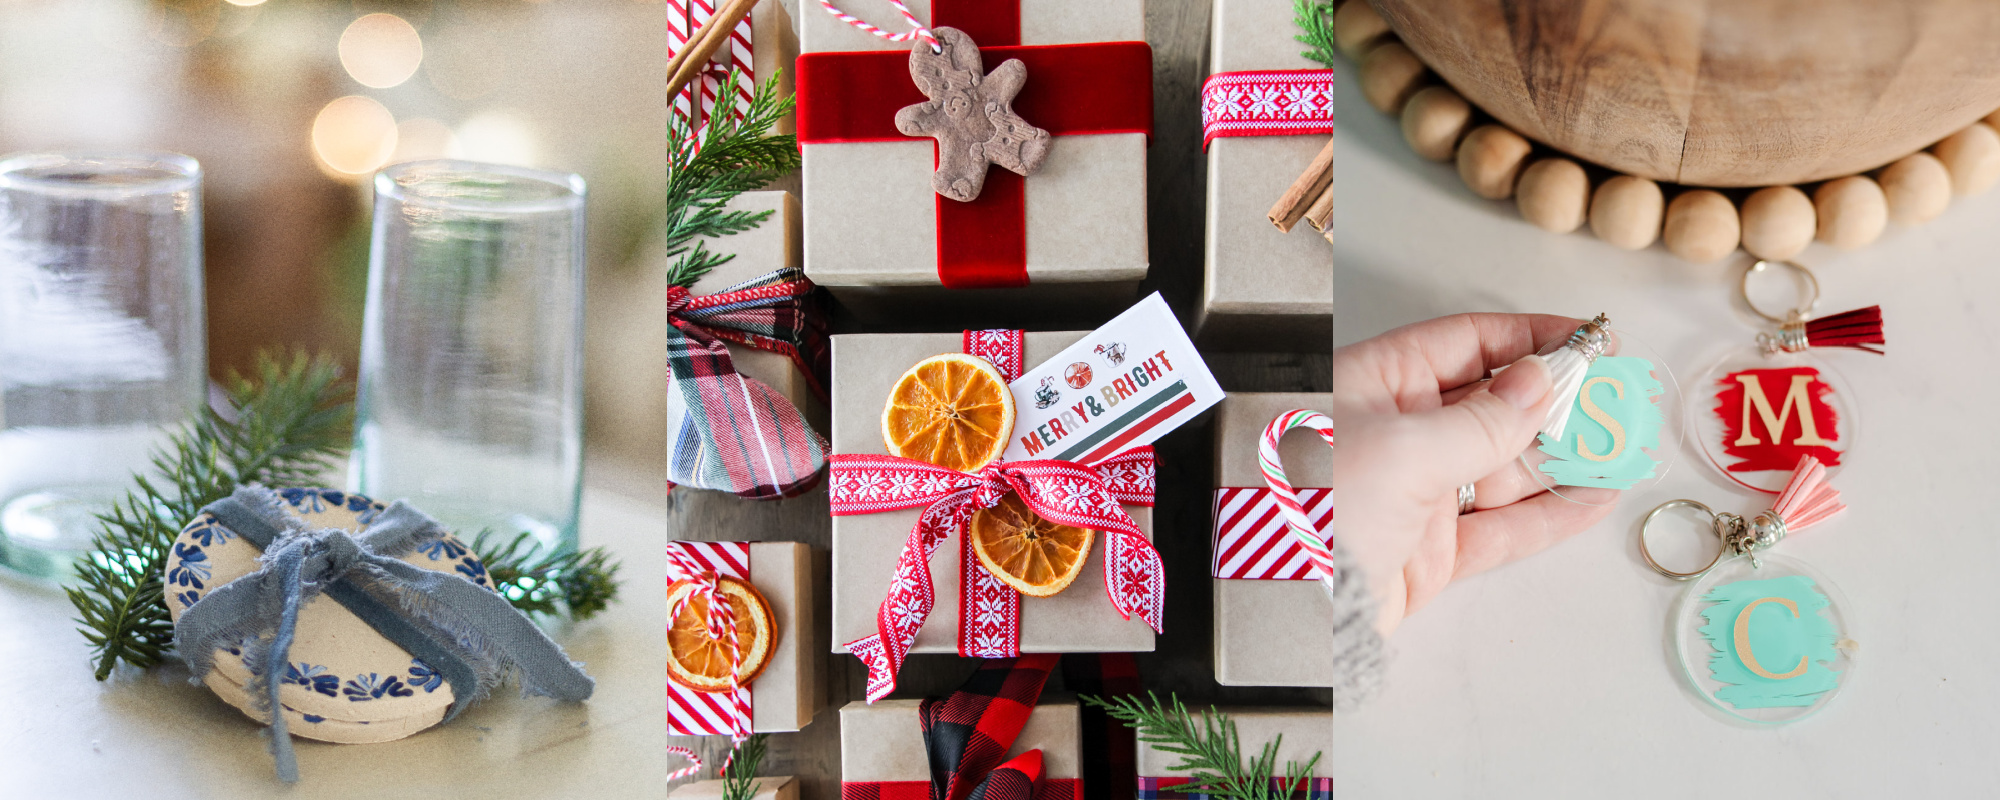 3 DIY gift ideas for the holidays